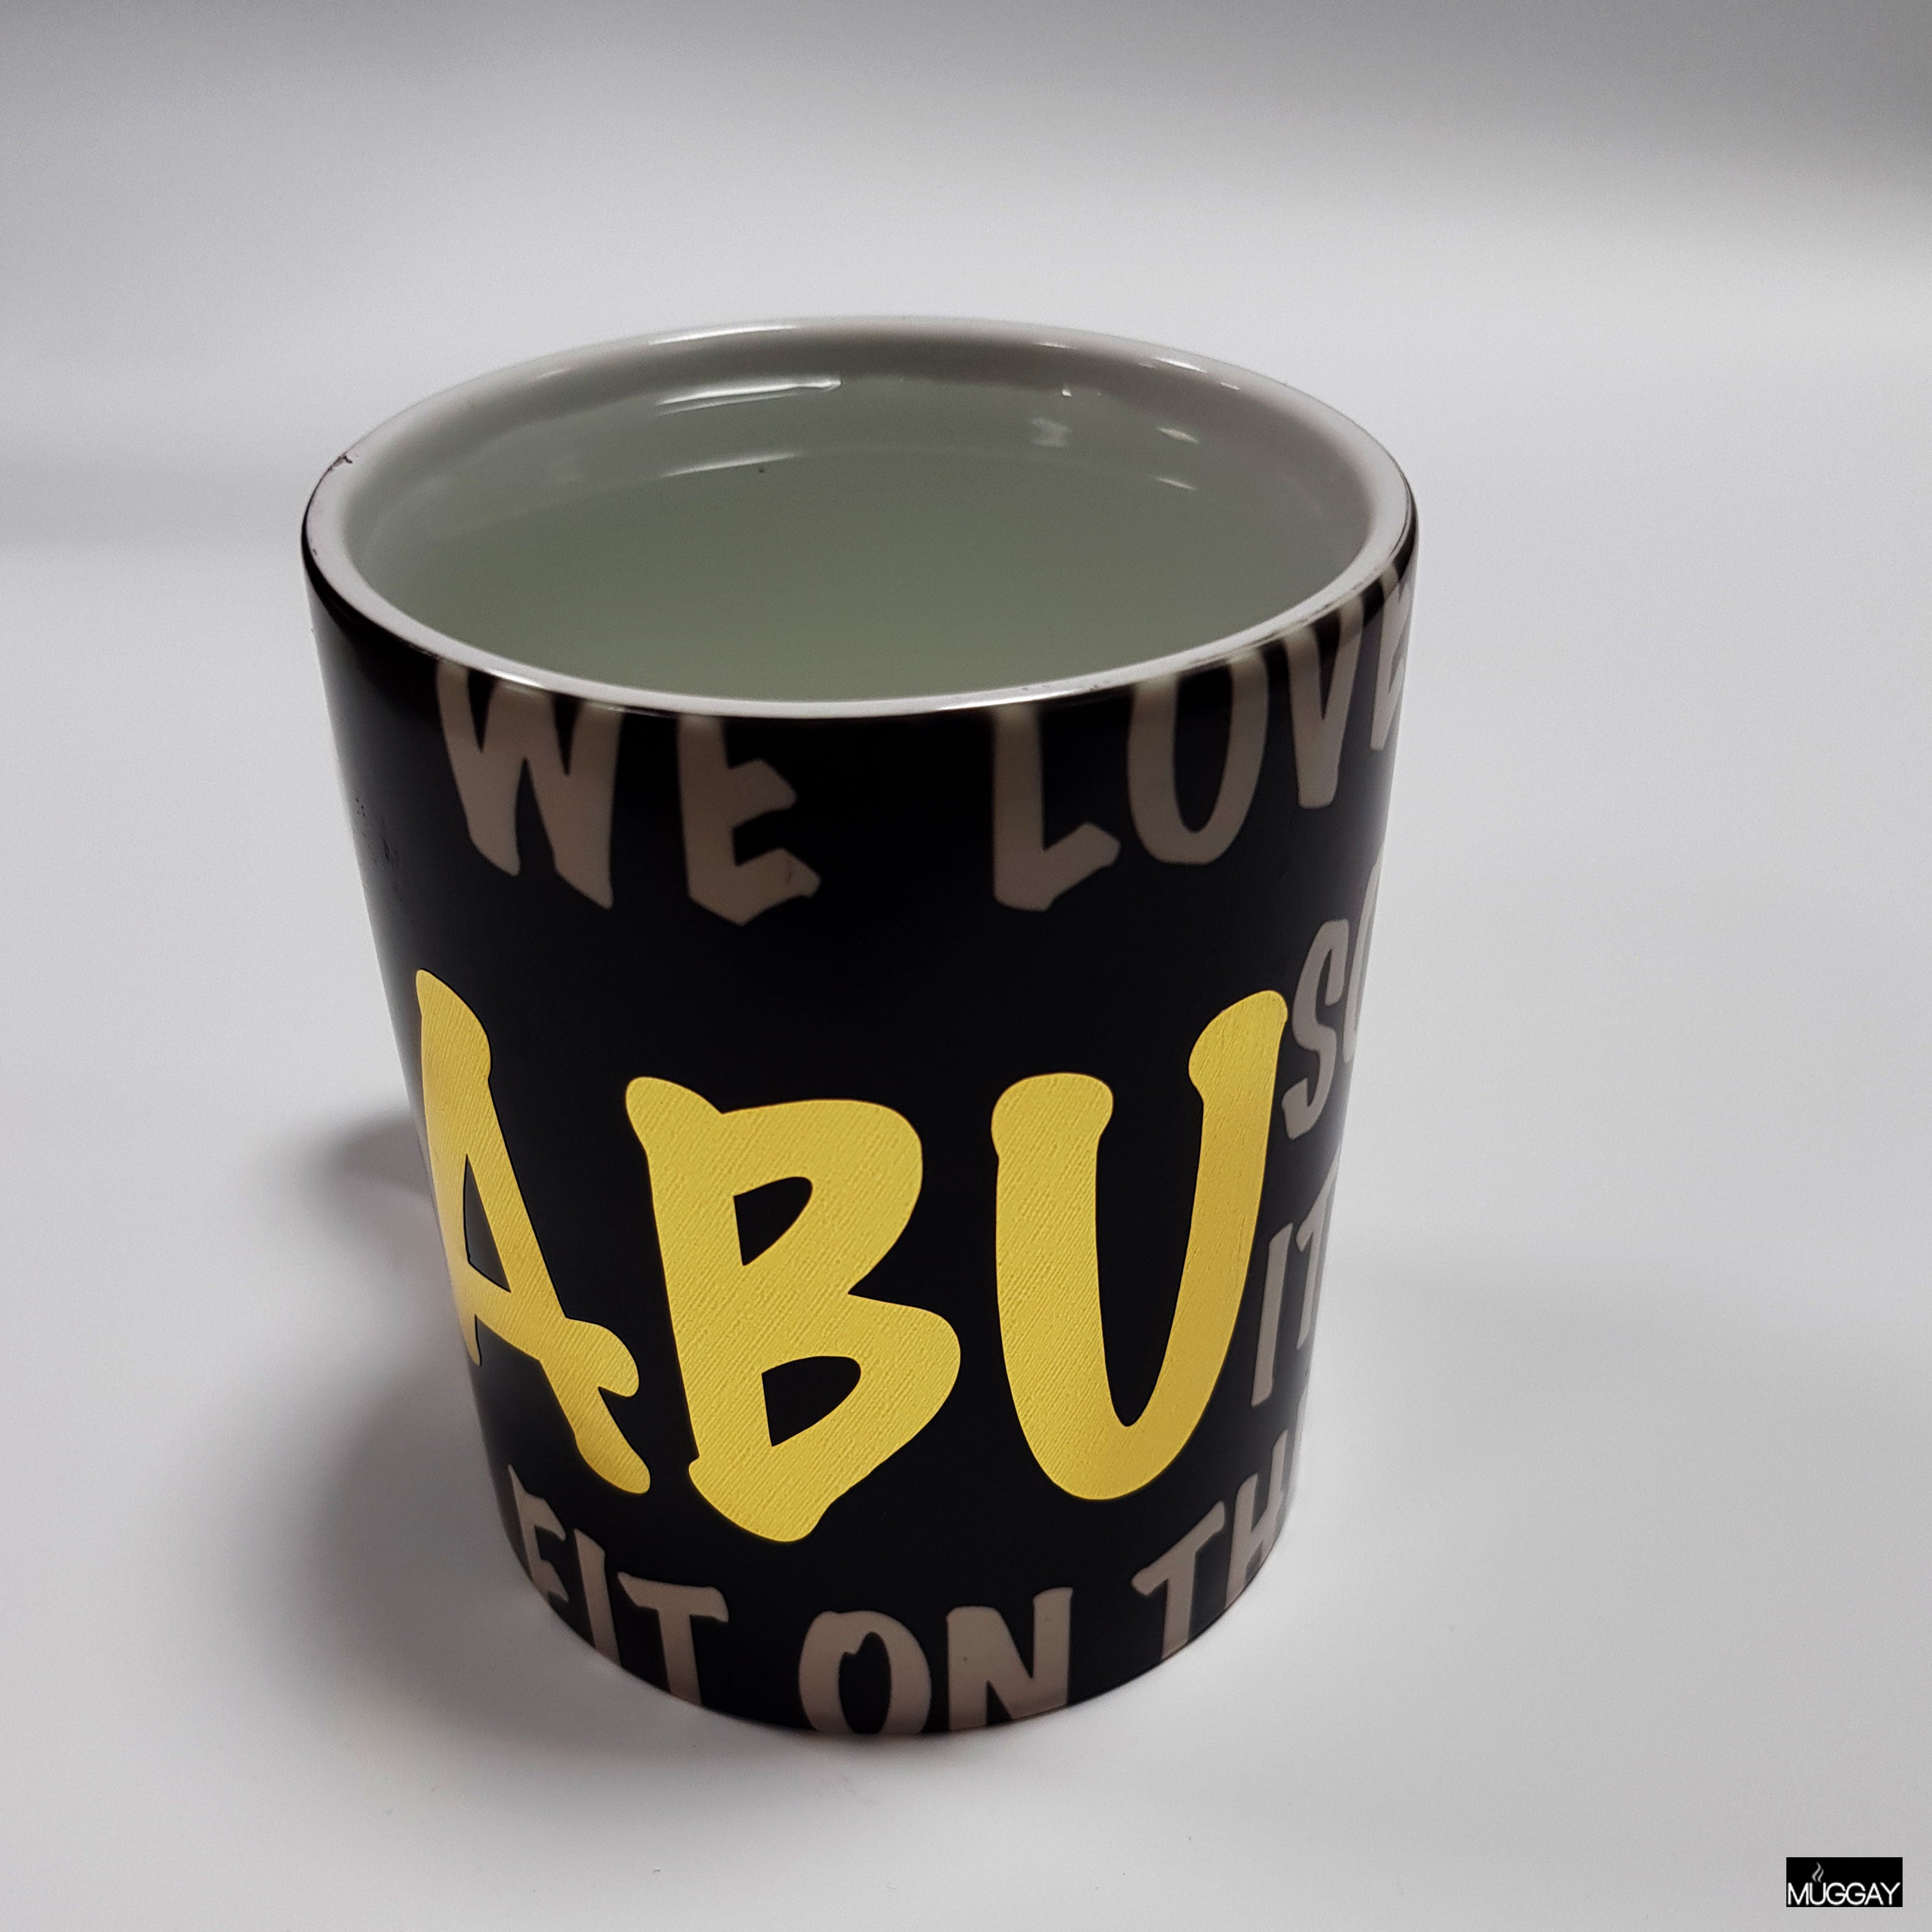 We love you so much Abu, that it wont fit on this mug